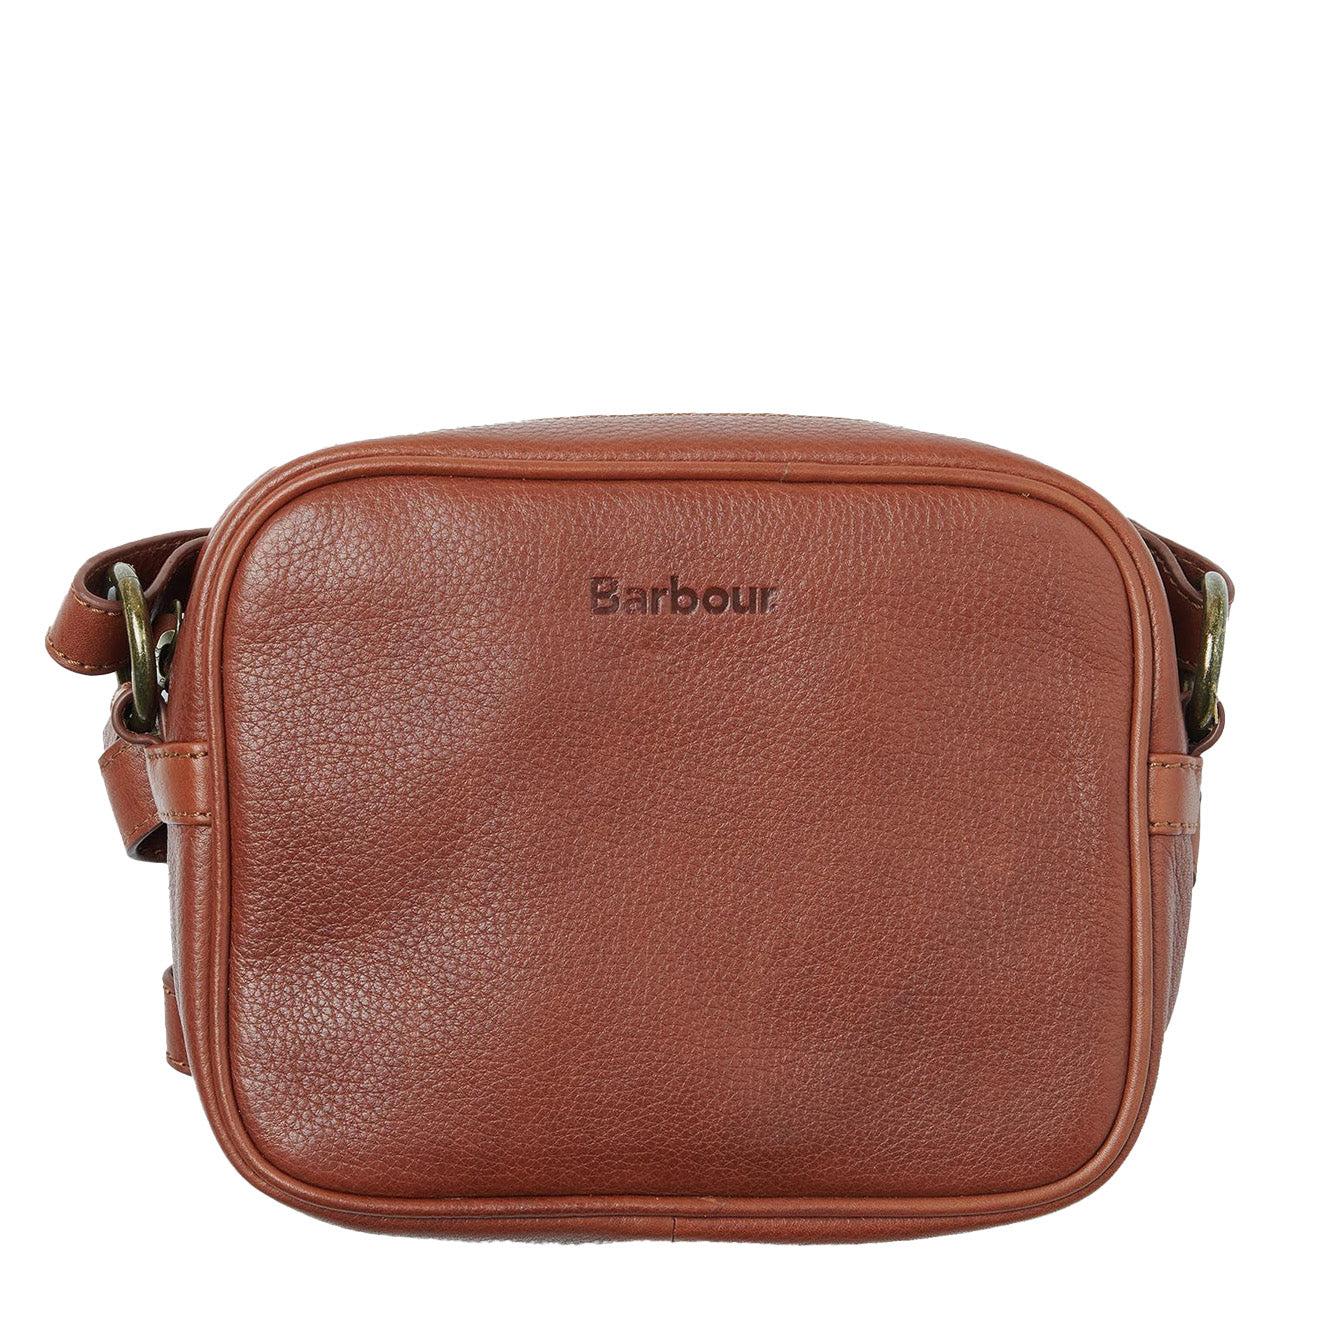 Barbour Clyde Leather Bag in Brown | Lyst